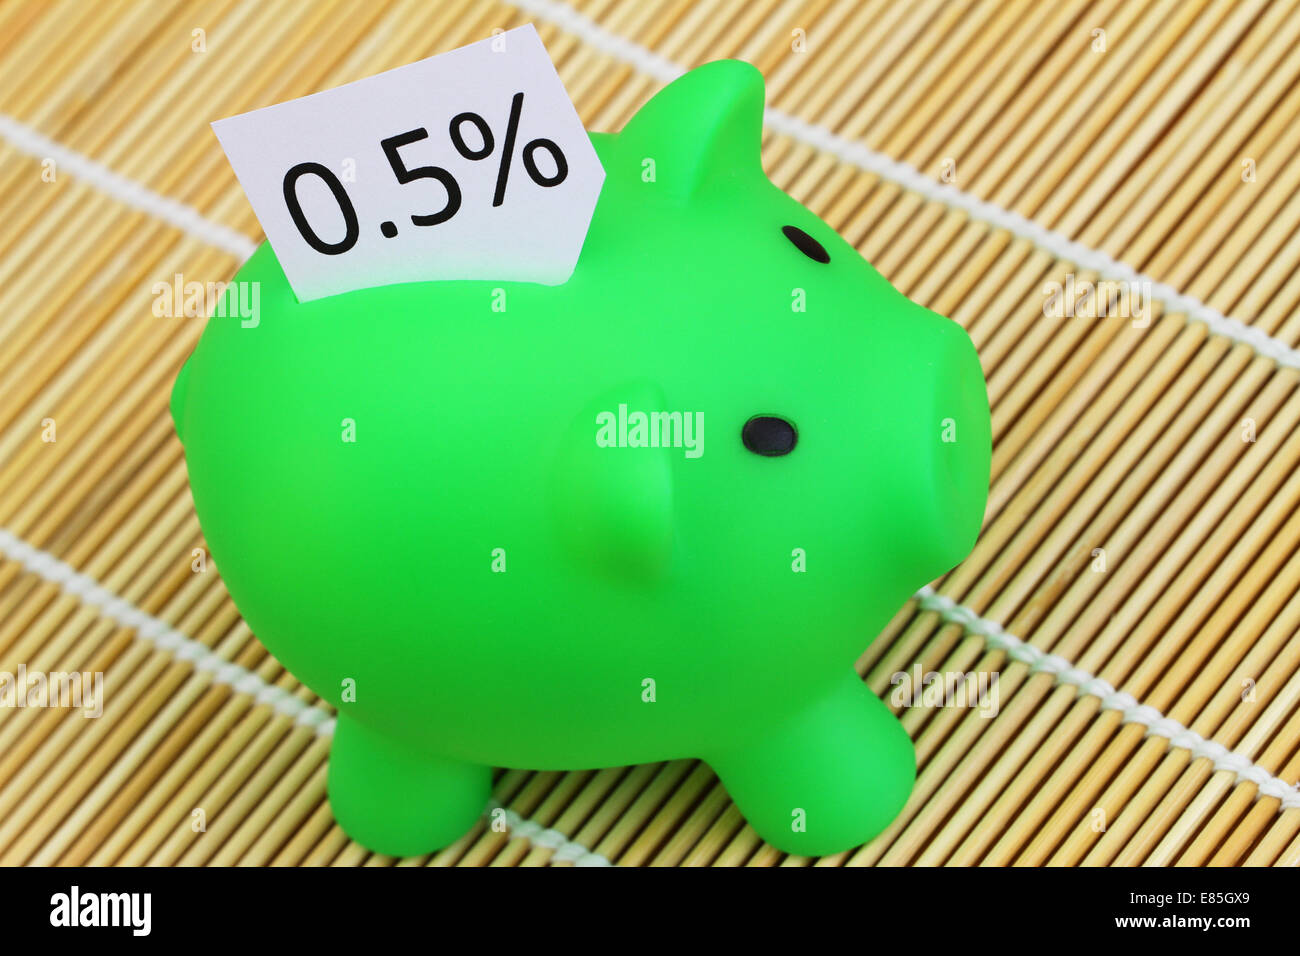 Piggy bank with note showing 0,5% interest rate sticking out of it Stock Photo